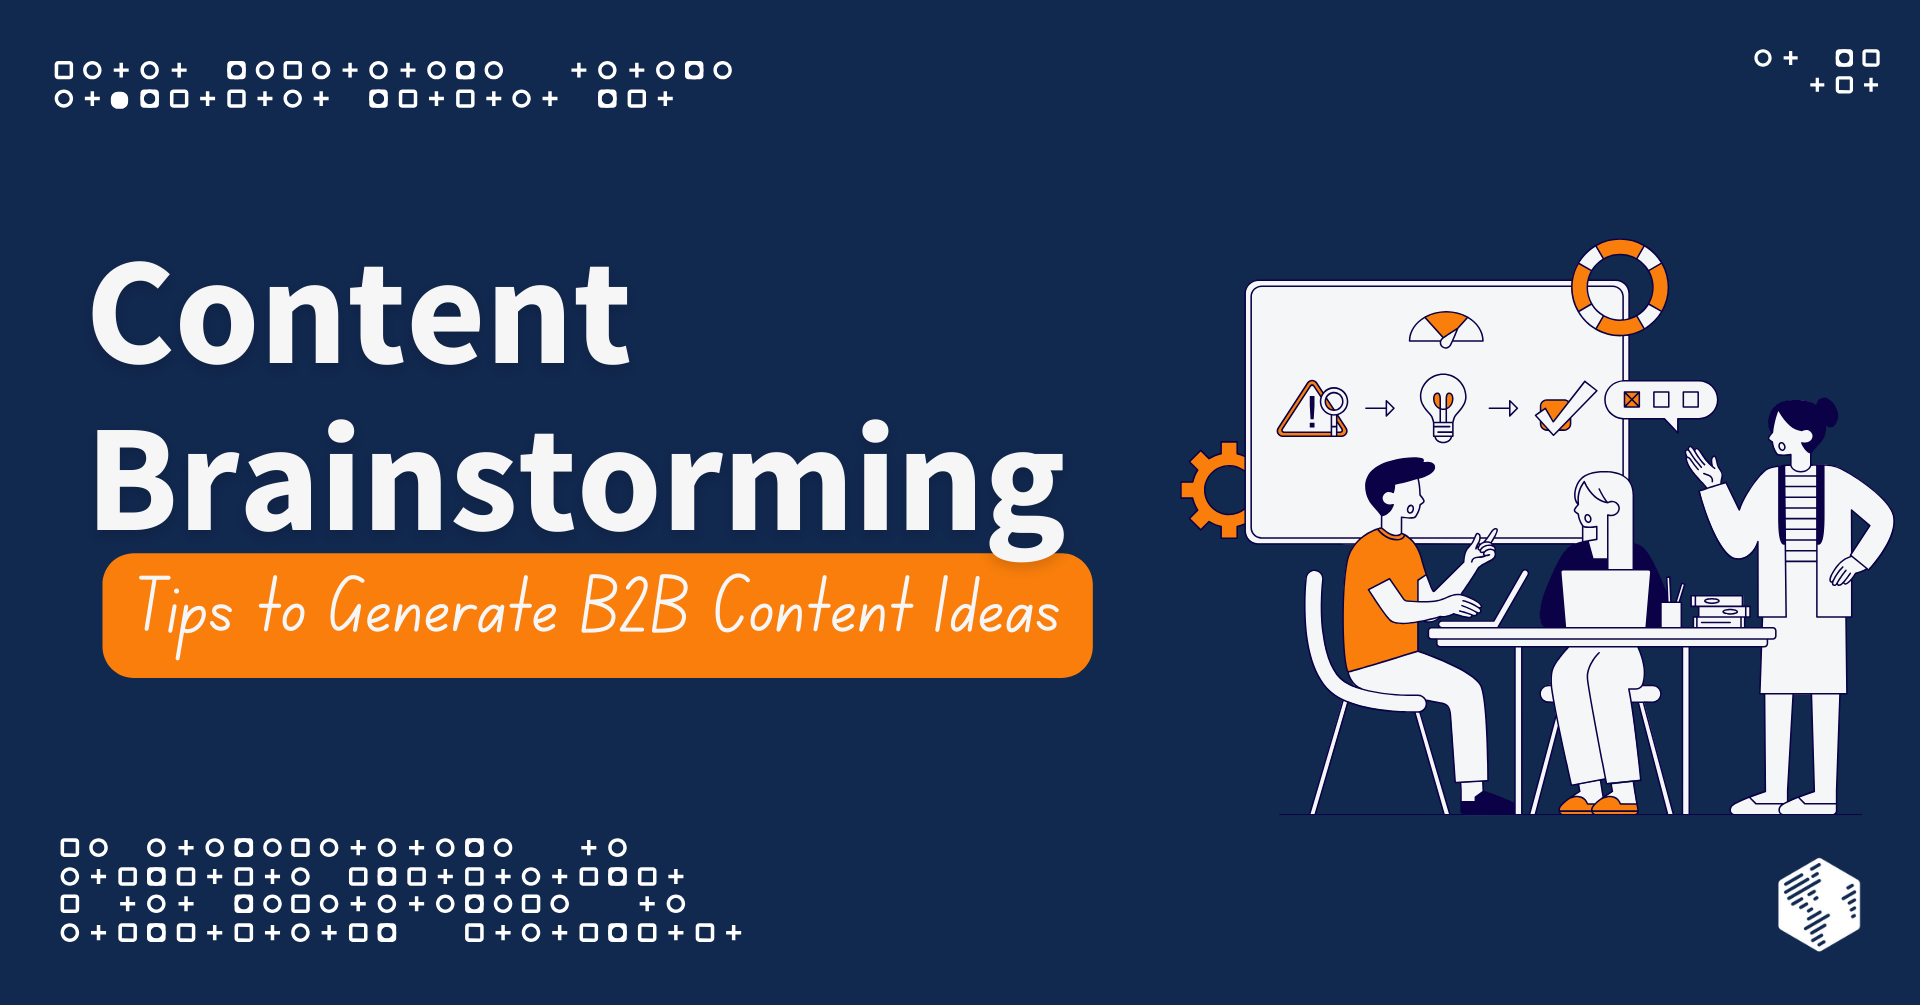 Content Brainstorming: Tips to Generate B2B Content Ideas